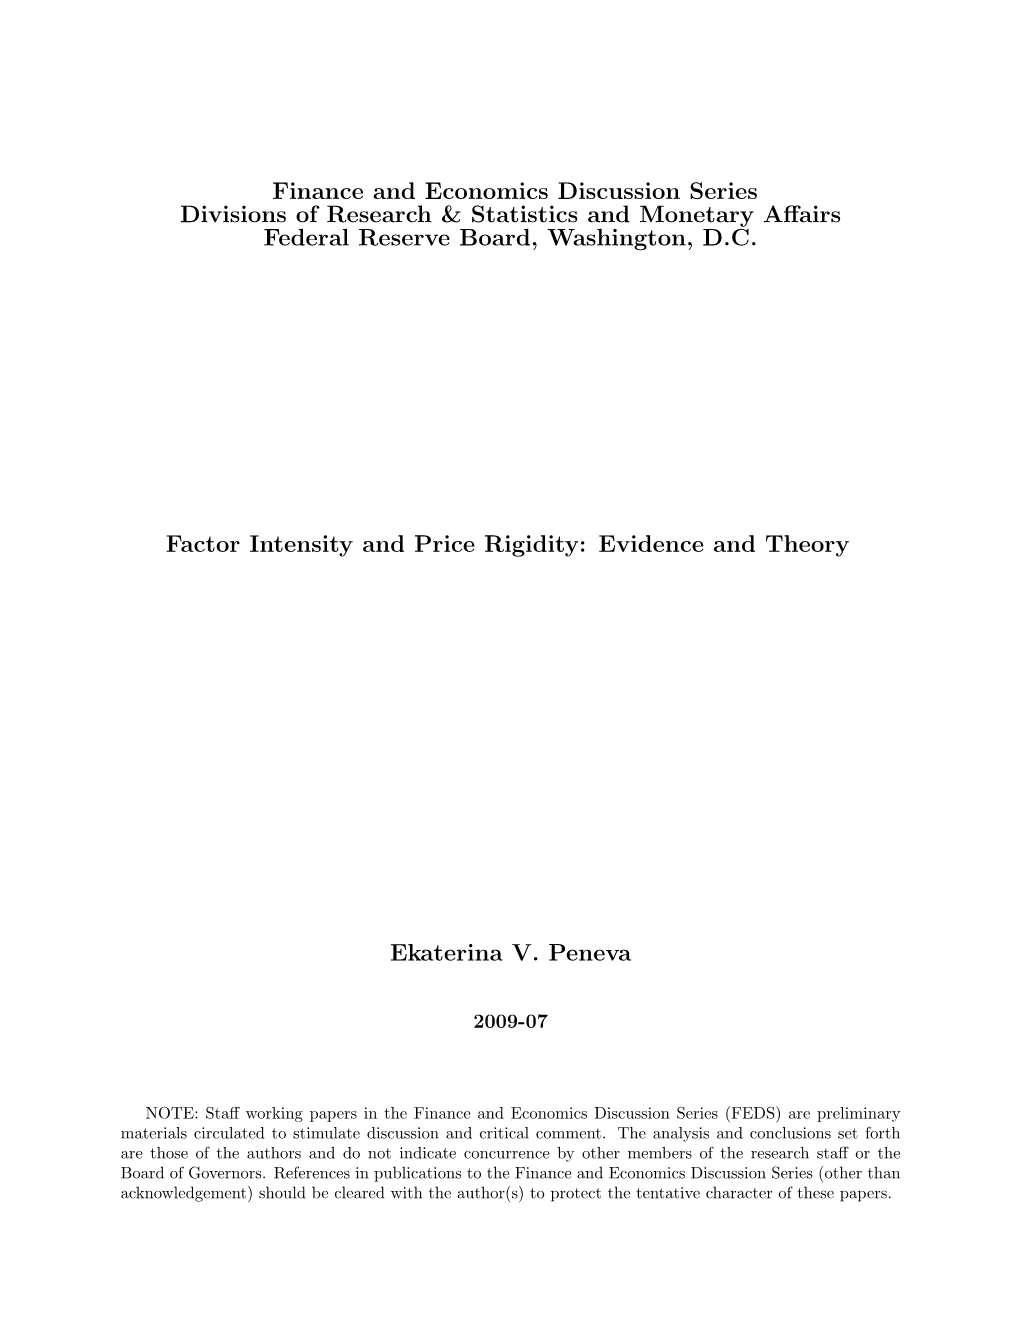 Factor Intensity and Price Rigidity: Evidence and Theory